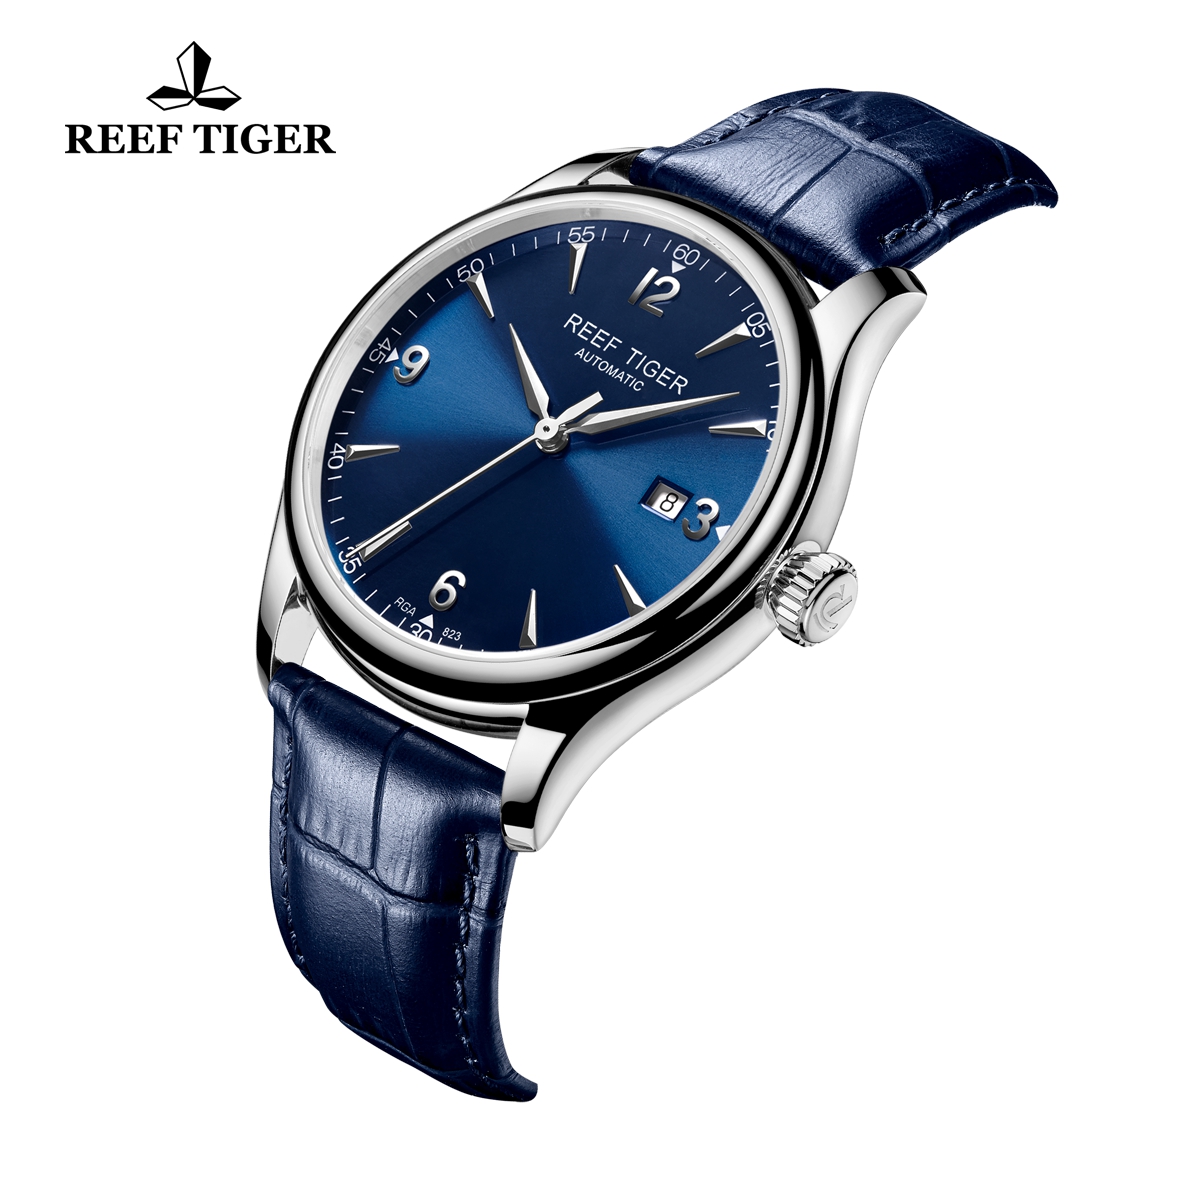 Reef Tiger Heritage Dress Automatic Watch Blue Dial Calfskin Leather Strap RGA823G -YLL